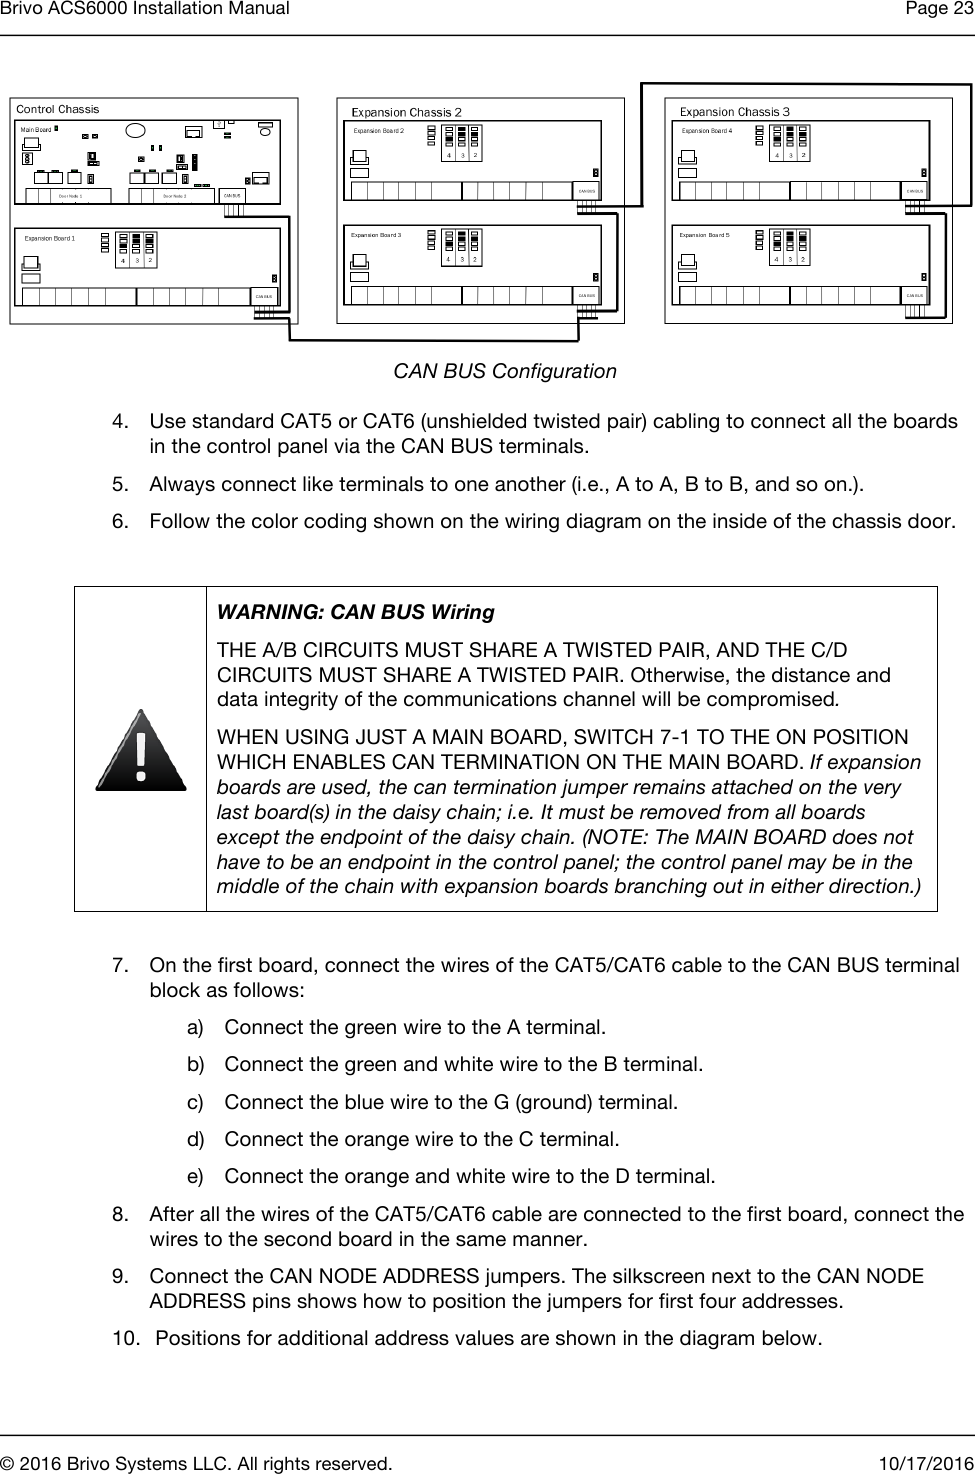 Brivo ACS6000 Installation Manual Page 23      © 2016 Brivo Systems LLC. All rights reserved. 10/17/2016   CAN BUS Configuration 4. Use standard CAT5 or CAT6 (unshielded twisted pair) cabling to connect all the boards in the control panel via the CAN BUS terminals.  5. Always connect like terminals to one another (i.e., A to A, B to B, and so on.). 6. Follow the color coding shown on the wiring diagram on the inside of the chassis door.   WARNING: CAN BUS Wiring THE A/B CIRCUITS MUST SHARE A TWISTED PAIR, AND THE C/D CIRCUITS MUST SHARE A TWISTED PAIR. Otherwise, the distance and data integrity of the communications channel will be compromised. WHEN USING JUST A MAIN BOARD, SWITCH 7-1 TO THE ON POSITION WHICH ENABLES CAN TERMINATION ON THE MAIN BOARD. If expansion boards are used, the can termination jumper remains attached on the very last board(s) in the daisy chain; i.e. It must be removed from all boards except the endpoint of the daisy chain. (NOTE: The MAIN BOARD does not have to be an endpoint in the control panel; the control panel may be in the middle of the chain with expansion boards branching out in either direction.)   7. On the first board, connect the wires of the CAT5/CAT6 cable to the CAN BUS terminal block as follows: a) Connect the green wire to the A terminal. b) Connect the green and white wire to the B terminal. c) Connect the blue wire to the G (ground) terminal. d) Connect the orange wire to the C terminal. e) Connect the orange and white wire to the D terminal. 8. After all the wires of the CAT5/CAT6 cable are connected to the first board, connect the wires to the second board in the same manner. 9. Connect the CAN NODE ADDRESS jumpers. The silkscreen next to the CAN NODE ADDRESS pins shows how to position the jumpers for first four addresses.  10.  Positions for additional address values are shown in the diagram below. 